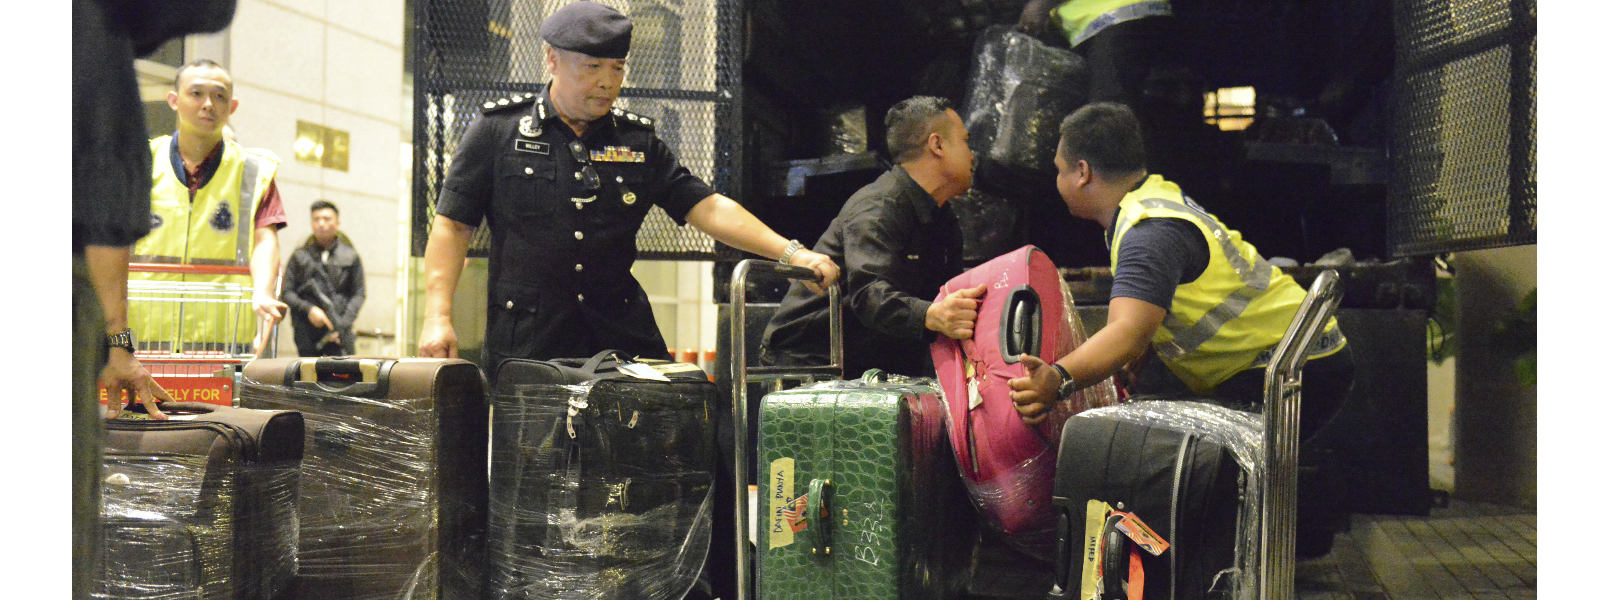 Cash filled suitcases at house linked to Razak